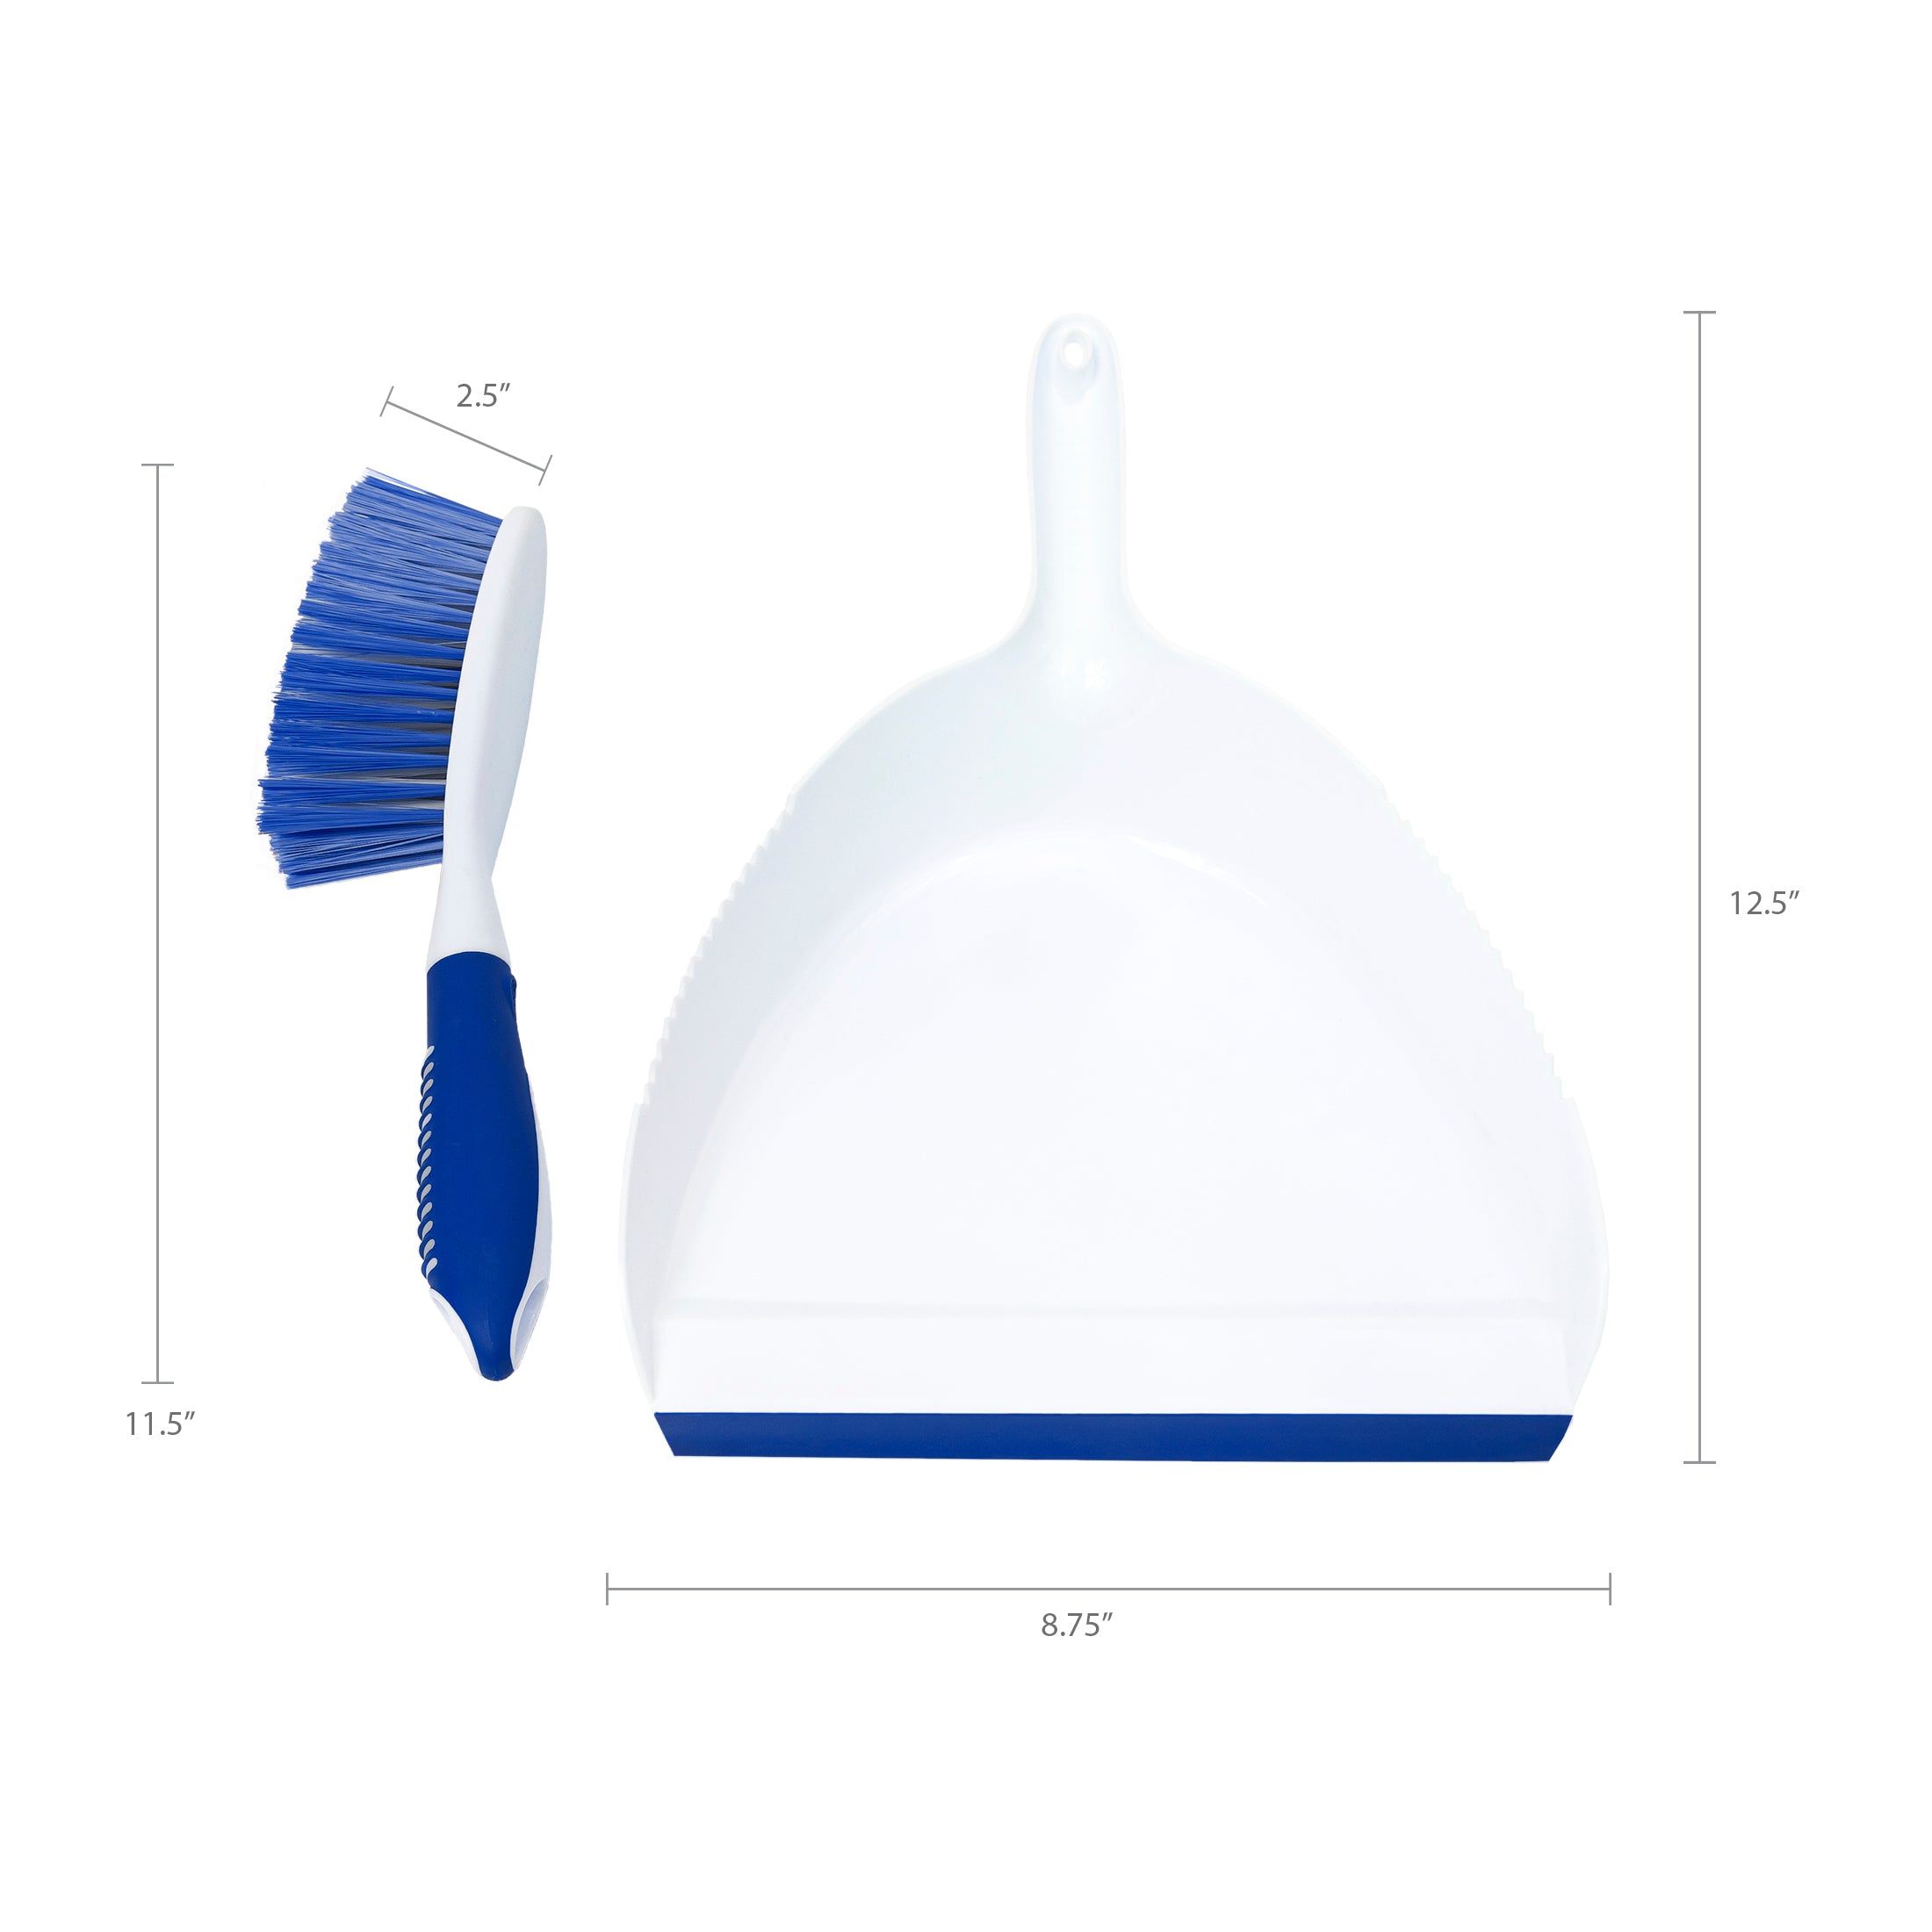 Blue And White Bathroom Cleaning Brush